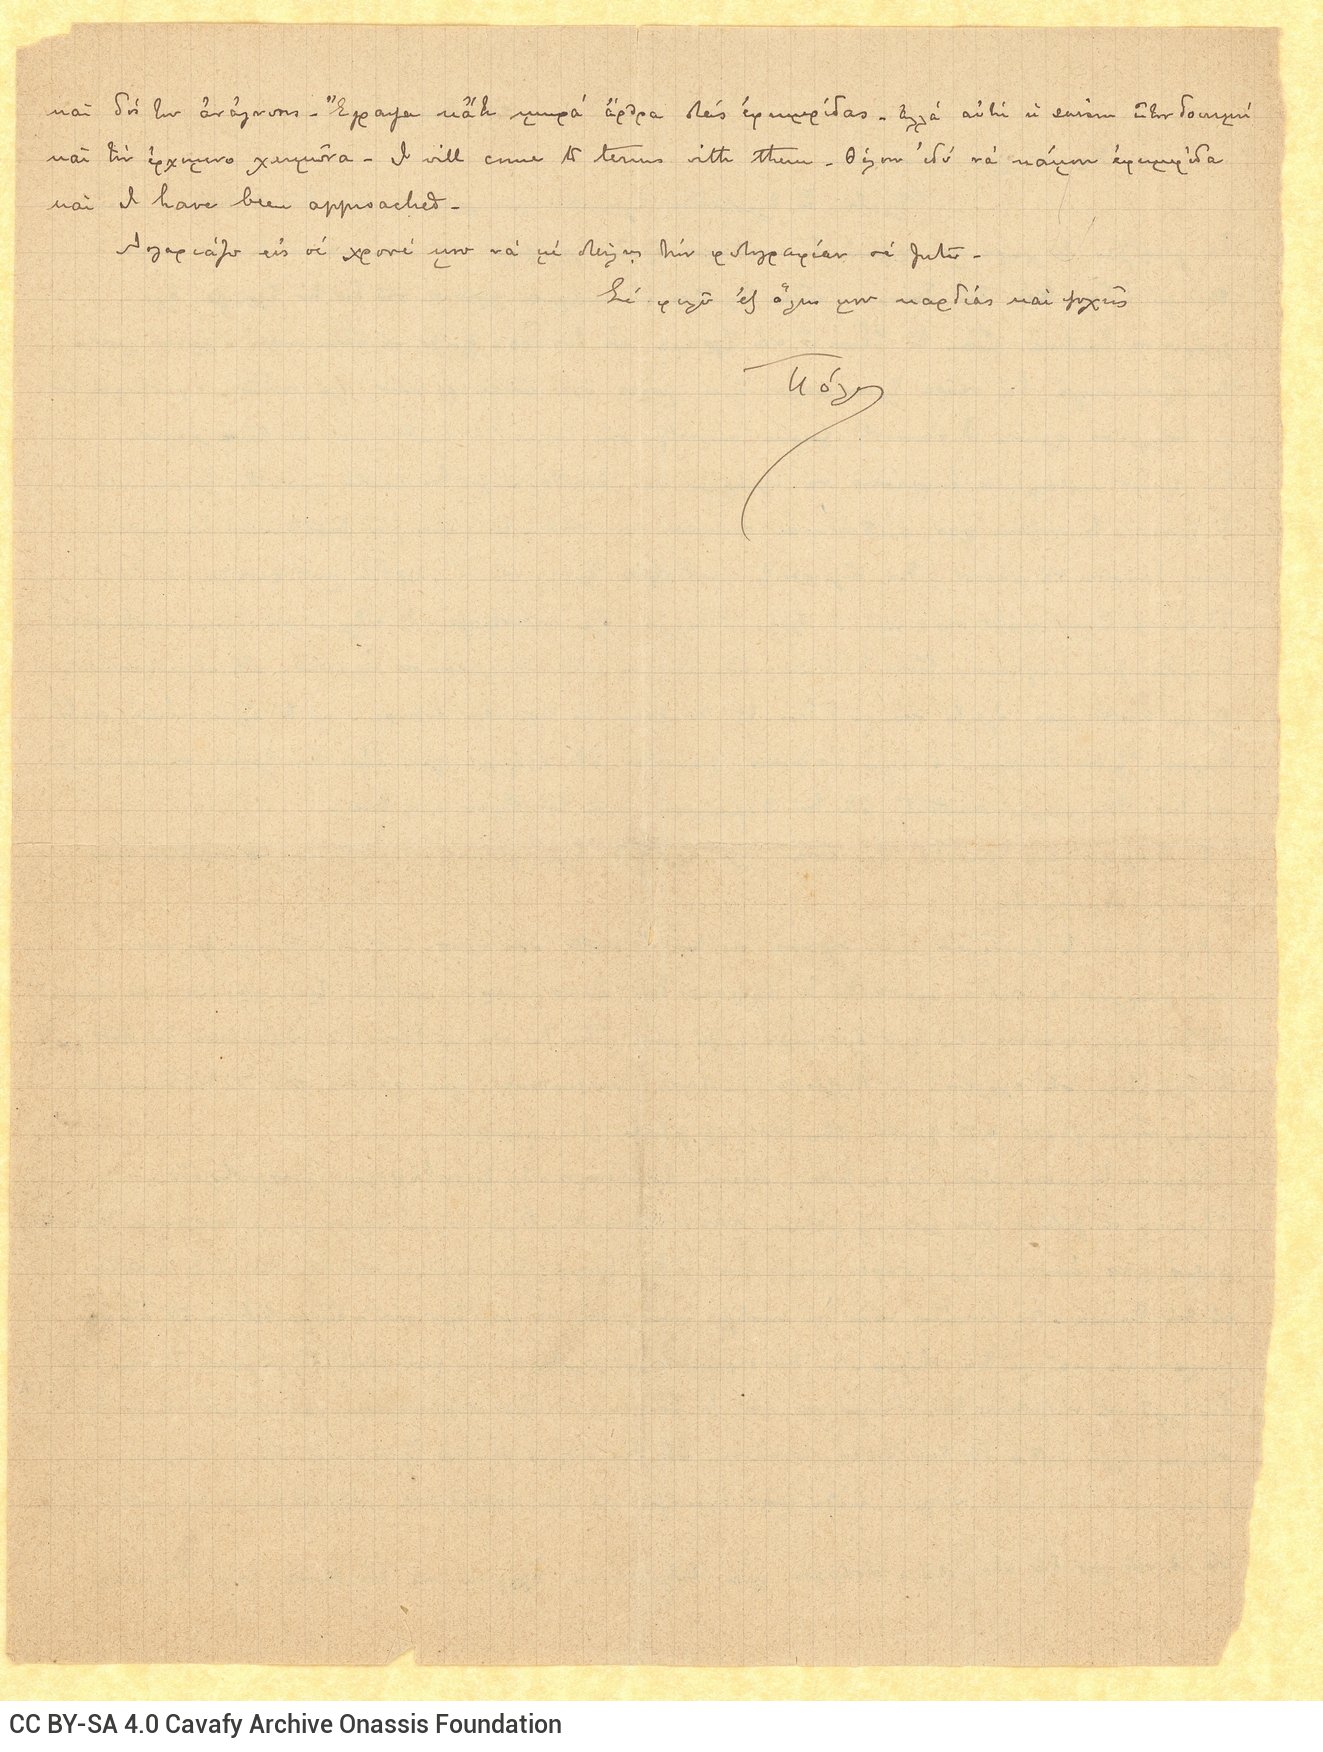 Handwritten letter by Paul Cavafy to C. P. Cavafy from France, according to the content and the sequence of his previous and 